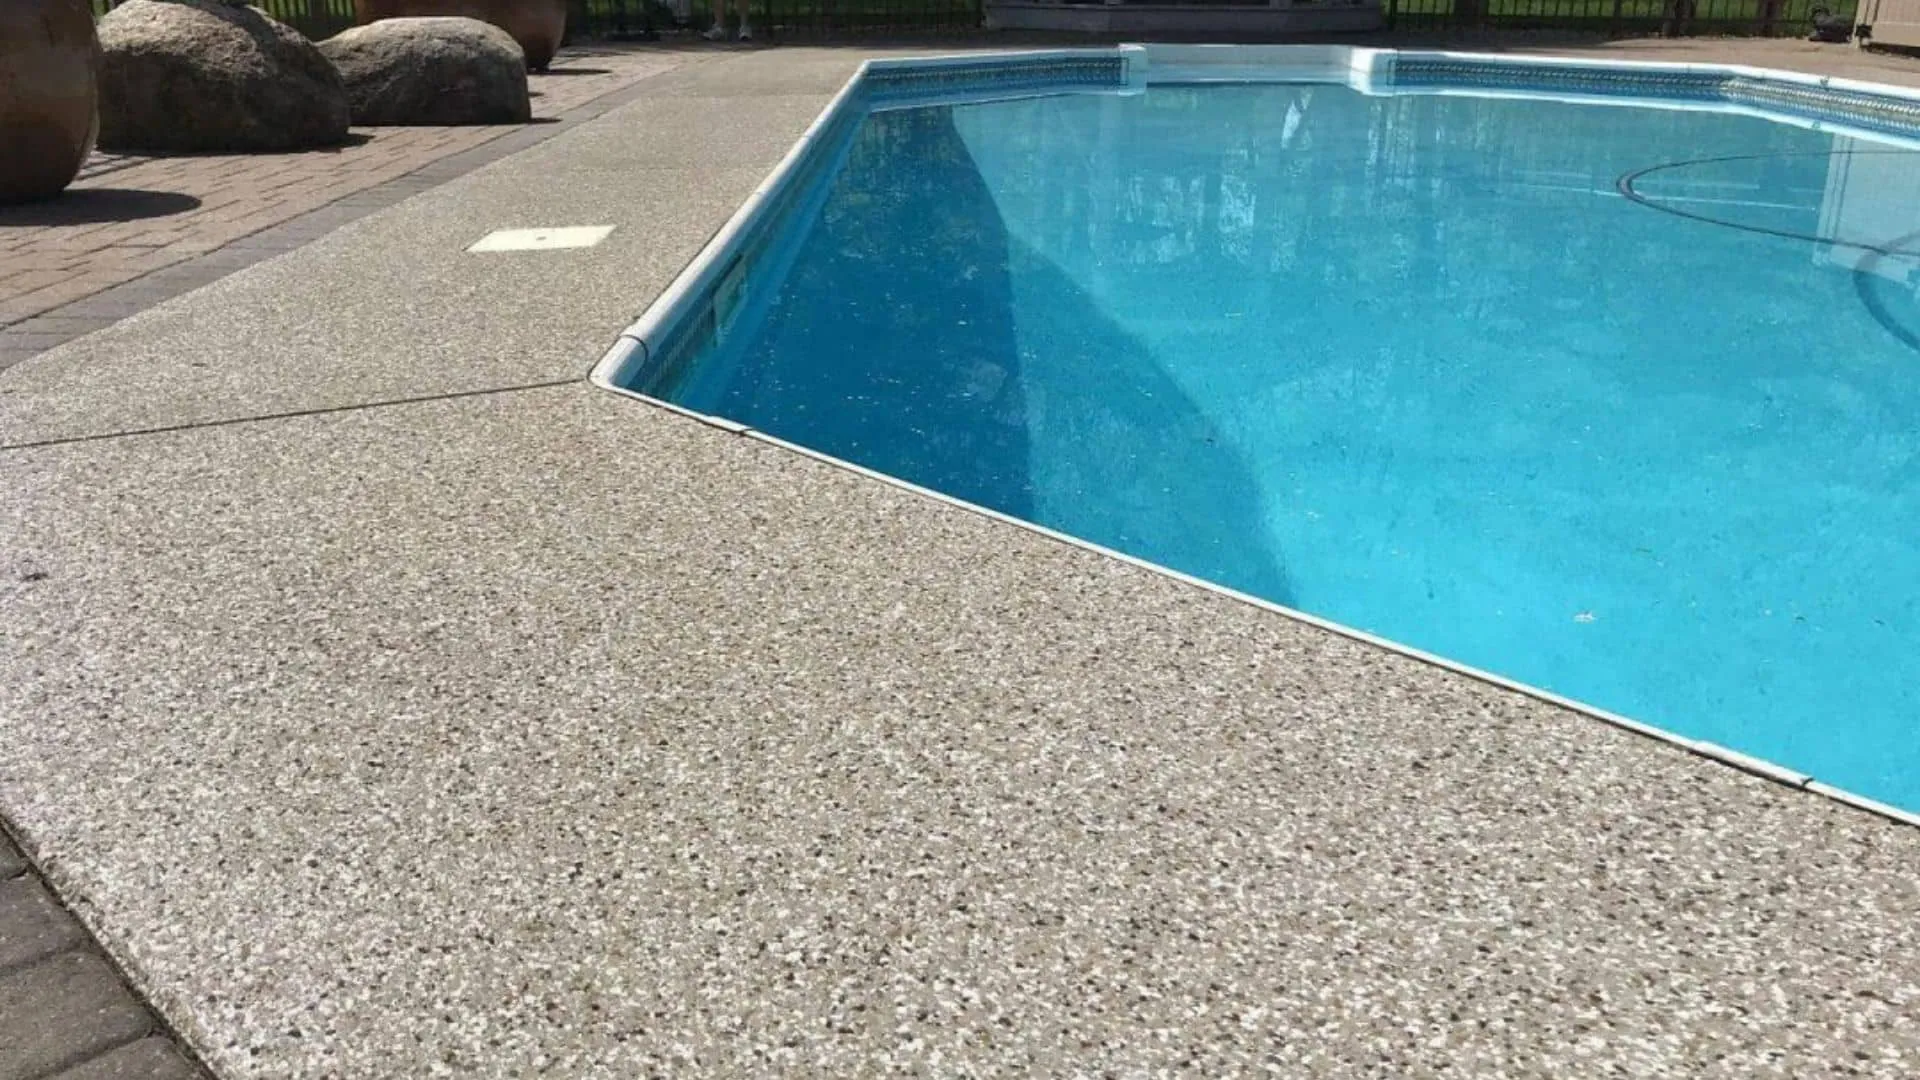 Picture of a pool area floor with surfacing work